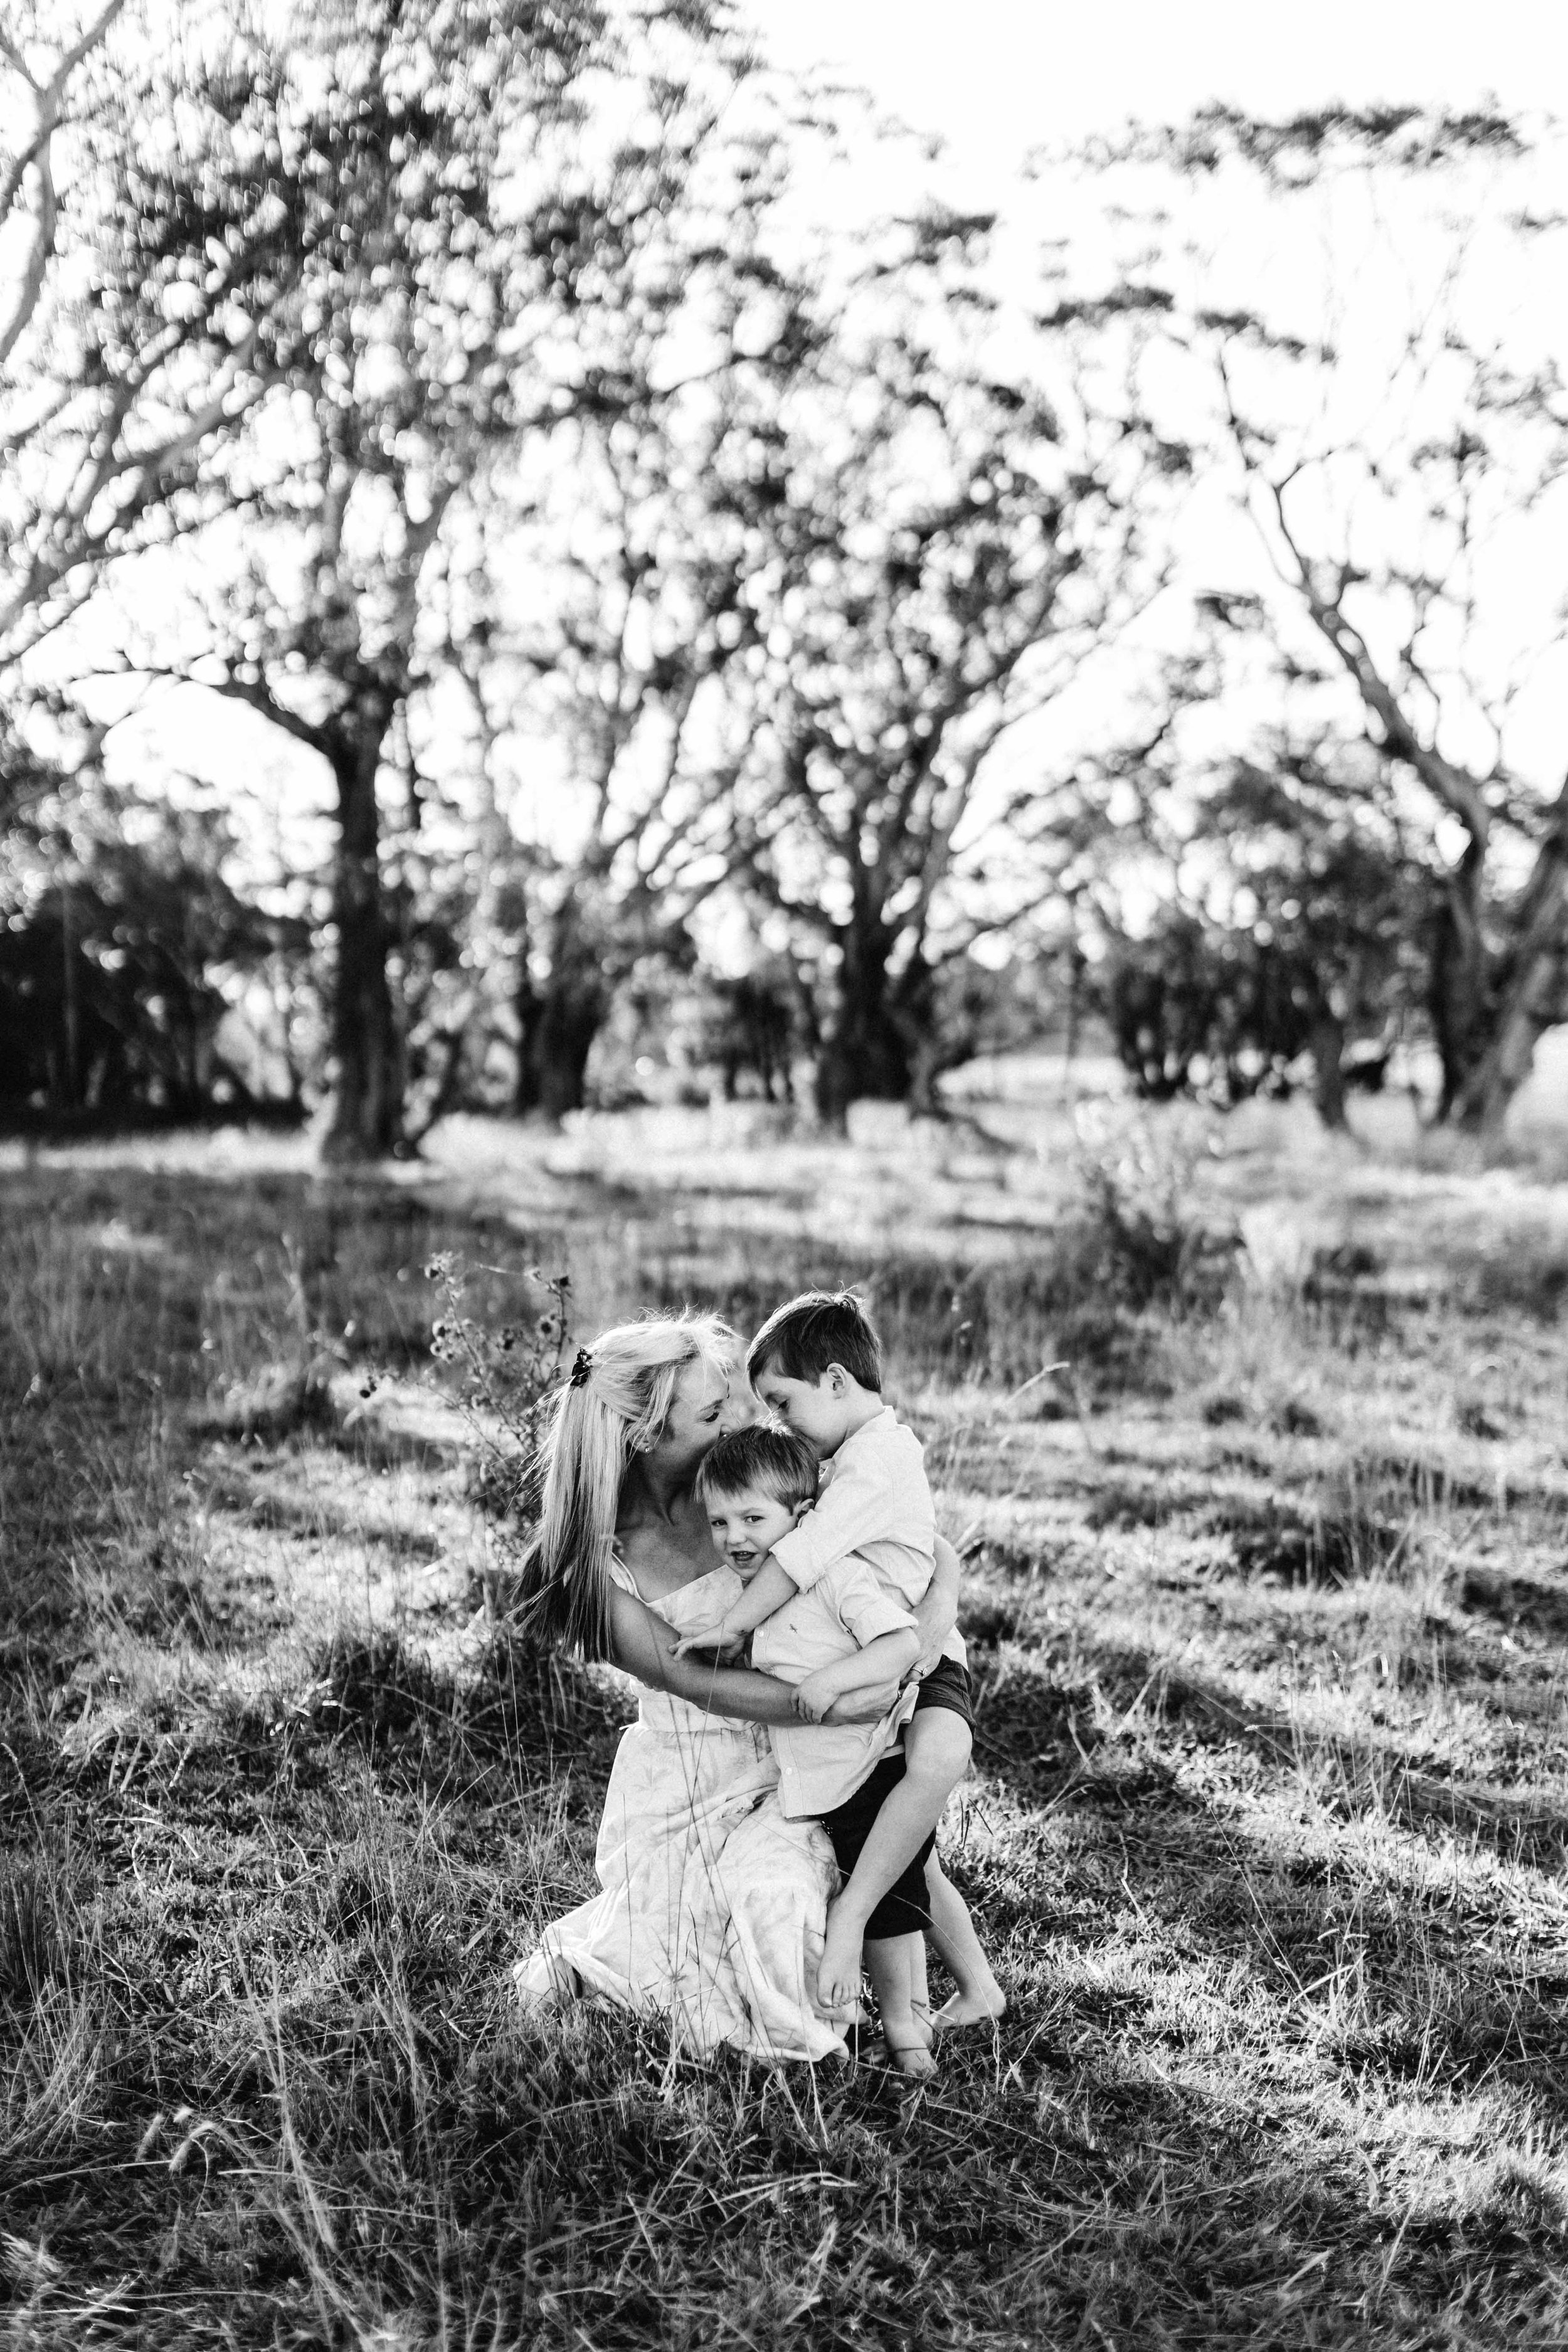 durney-family-exeter-southern-highlands-bowral-inhome-family-lifestyle-wollondilly-camden-macarthur-sydney-photography-www.emilyobrienphotography.net-53.jpg